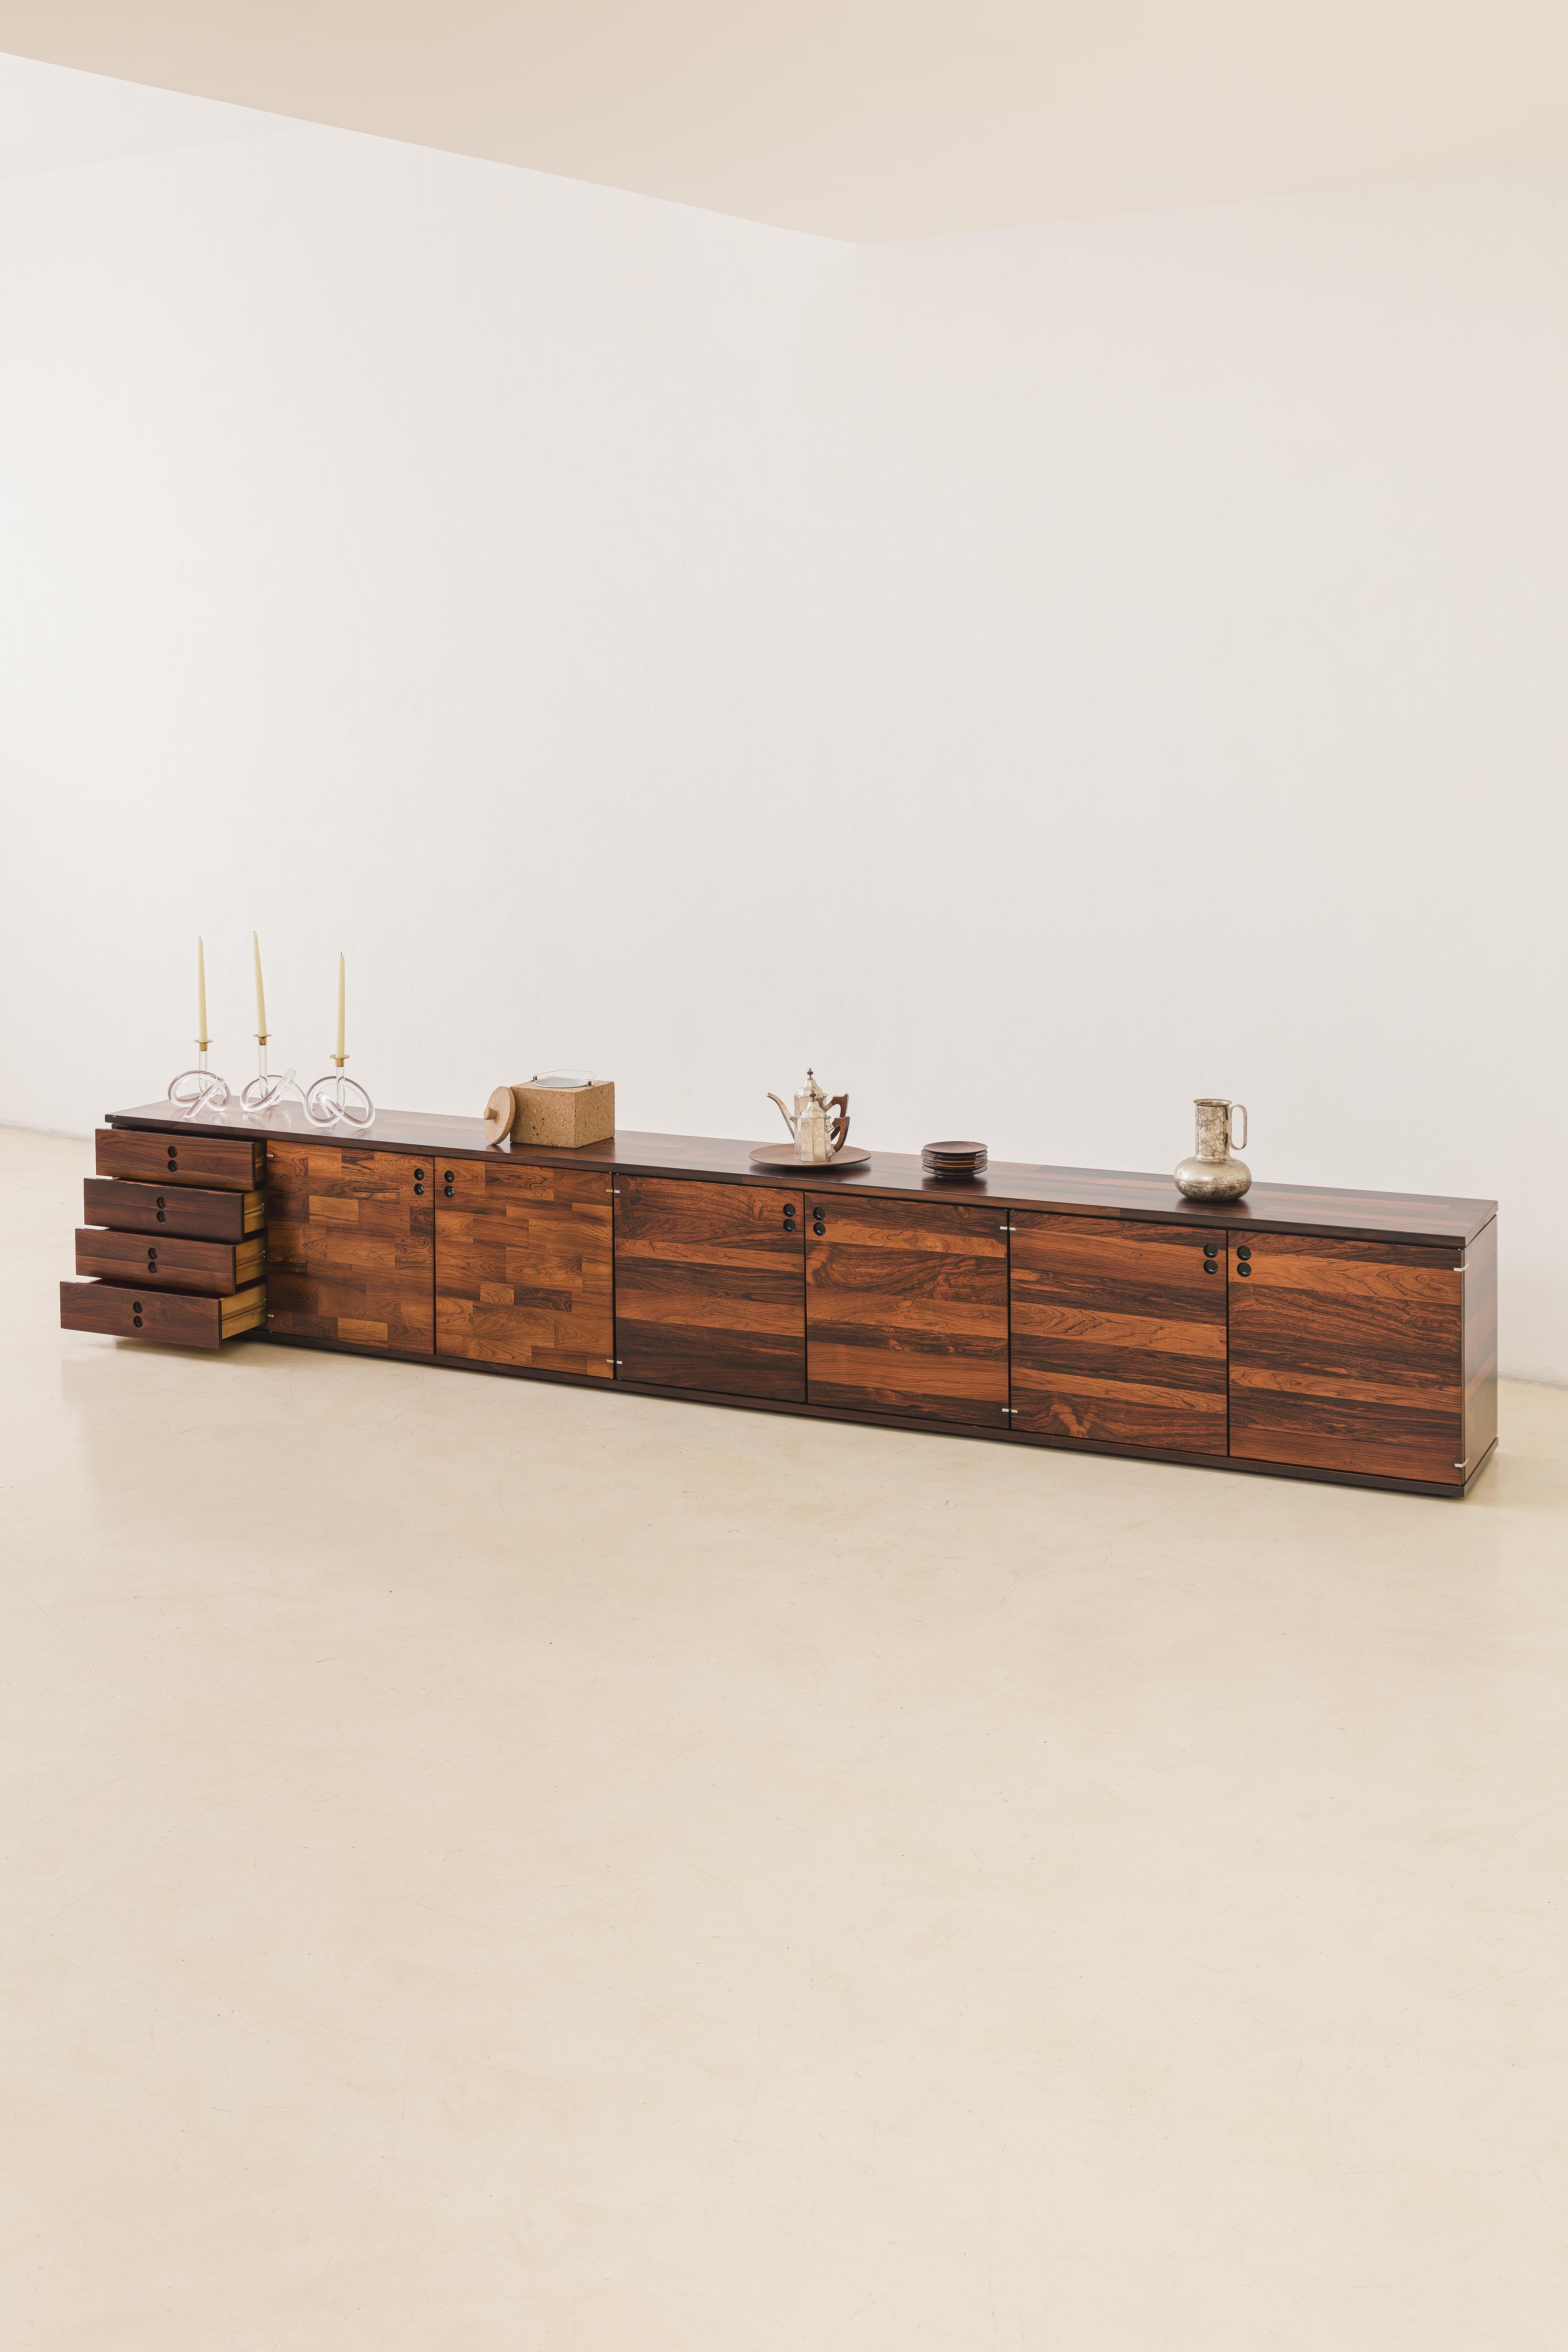 The modulated units were designed by Jorge Zalszupin (1922-2020) during the 1960s.

The piece remained in the designer's possession, for over four decades, in his personal residence. Entirely covered with rectangular pieces of marquetry wood, it is